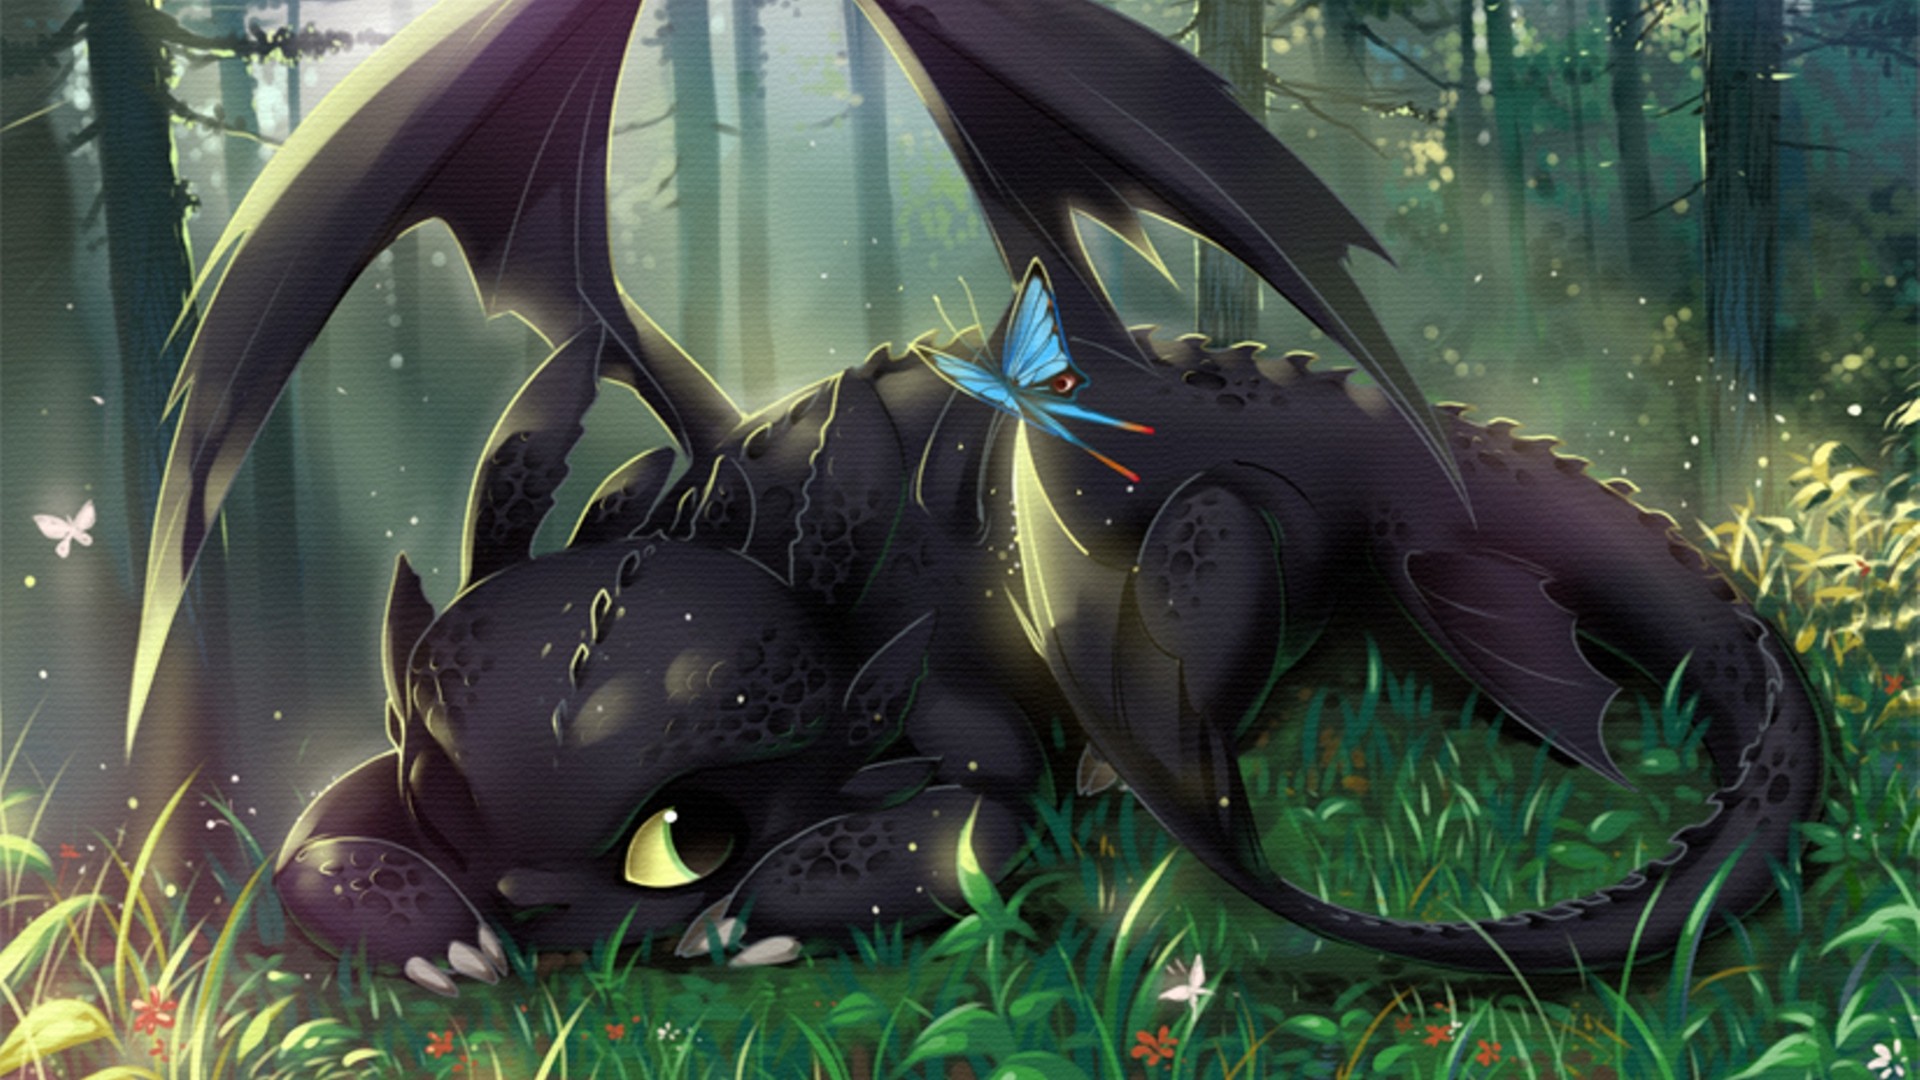 How To Train Your Dragon, Toothless Wallpaper